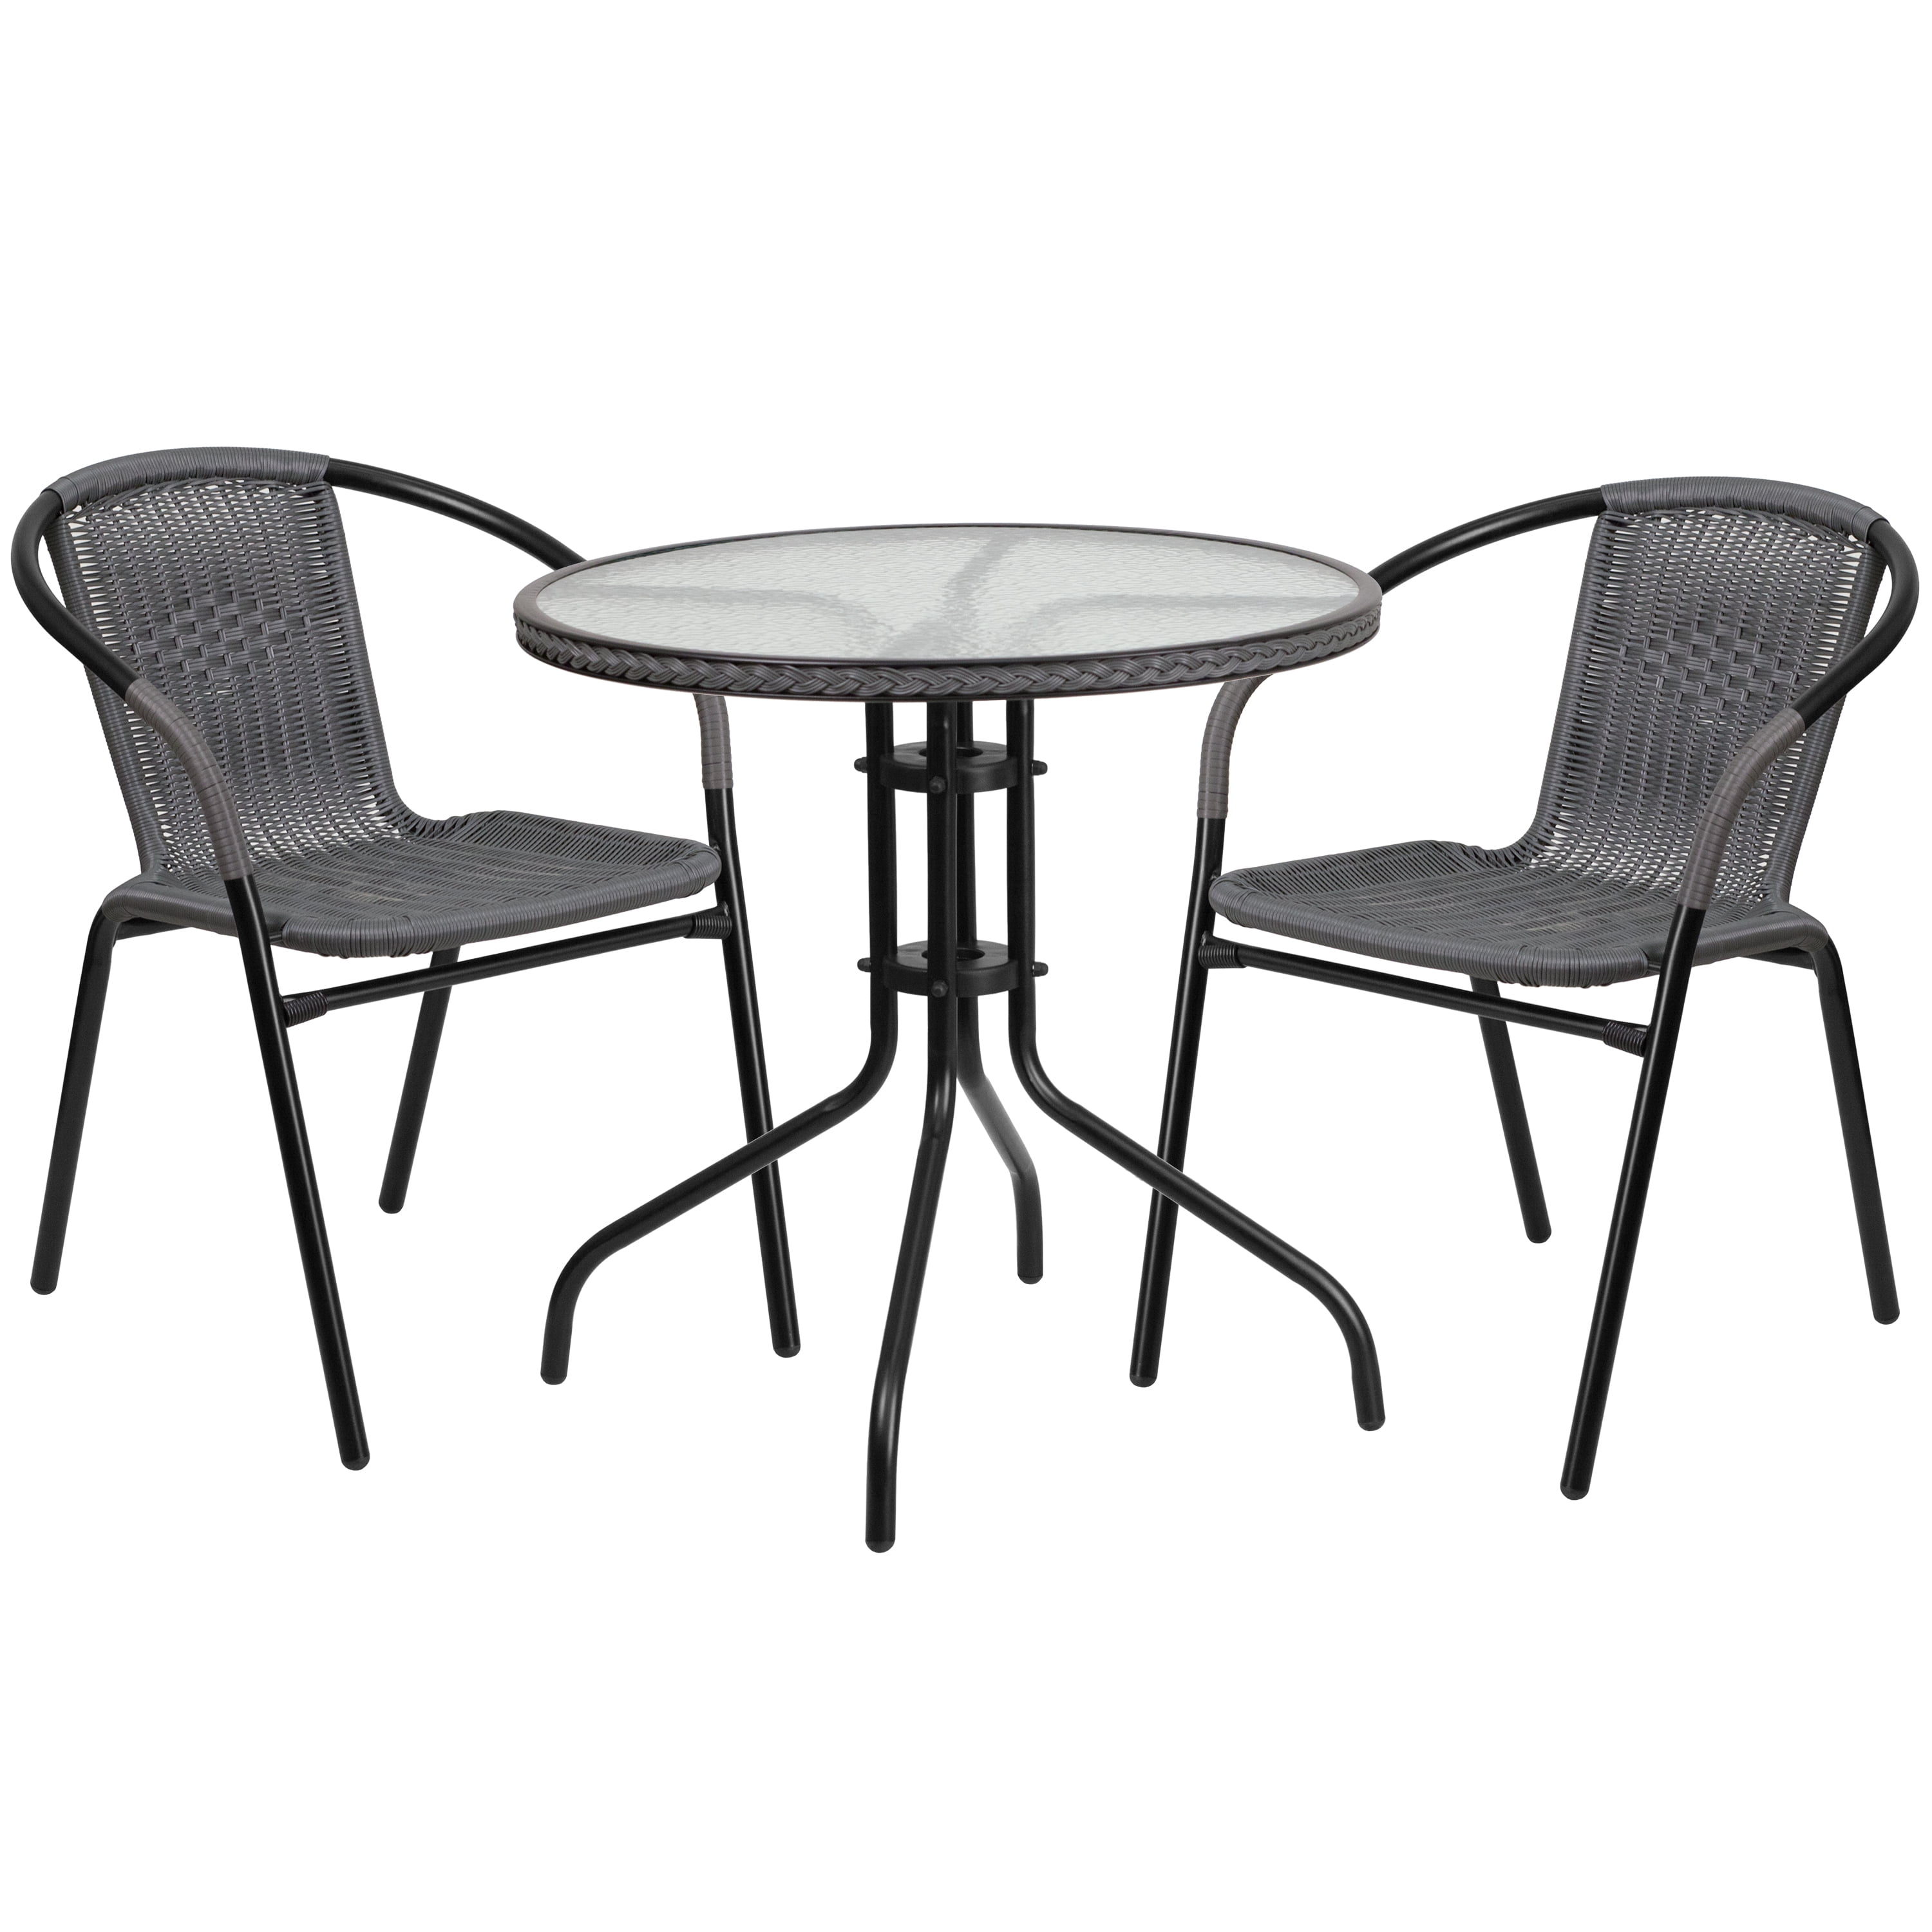 3 Piece Anchor Gray And Clear Round Glass Outdoor Furniture Patio Table